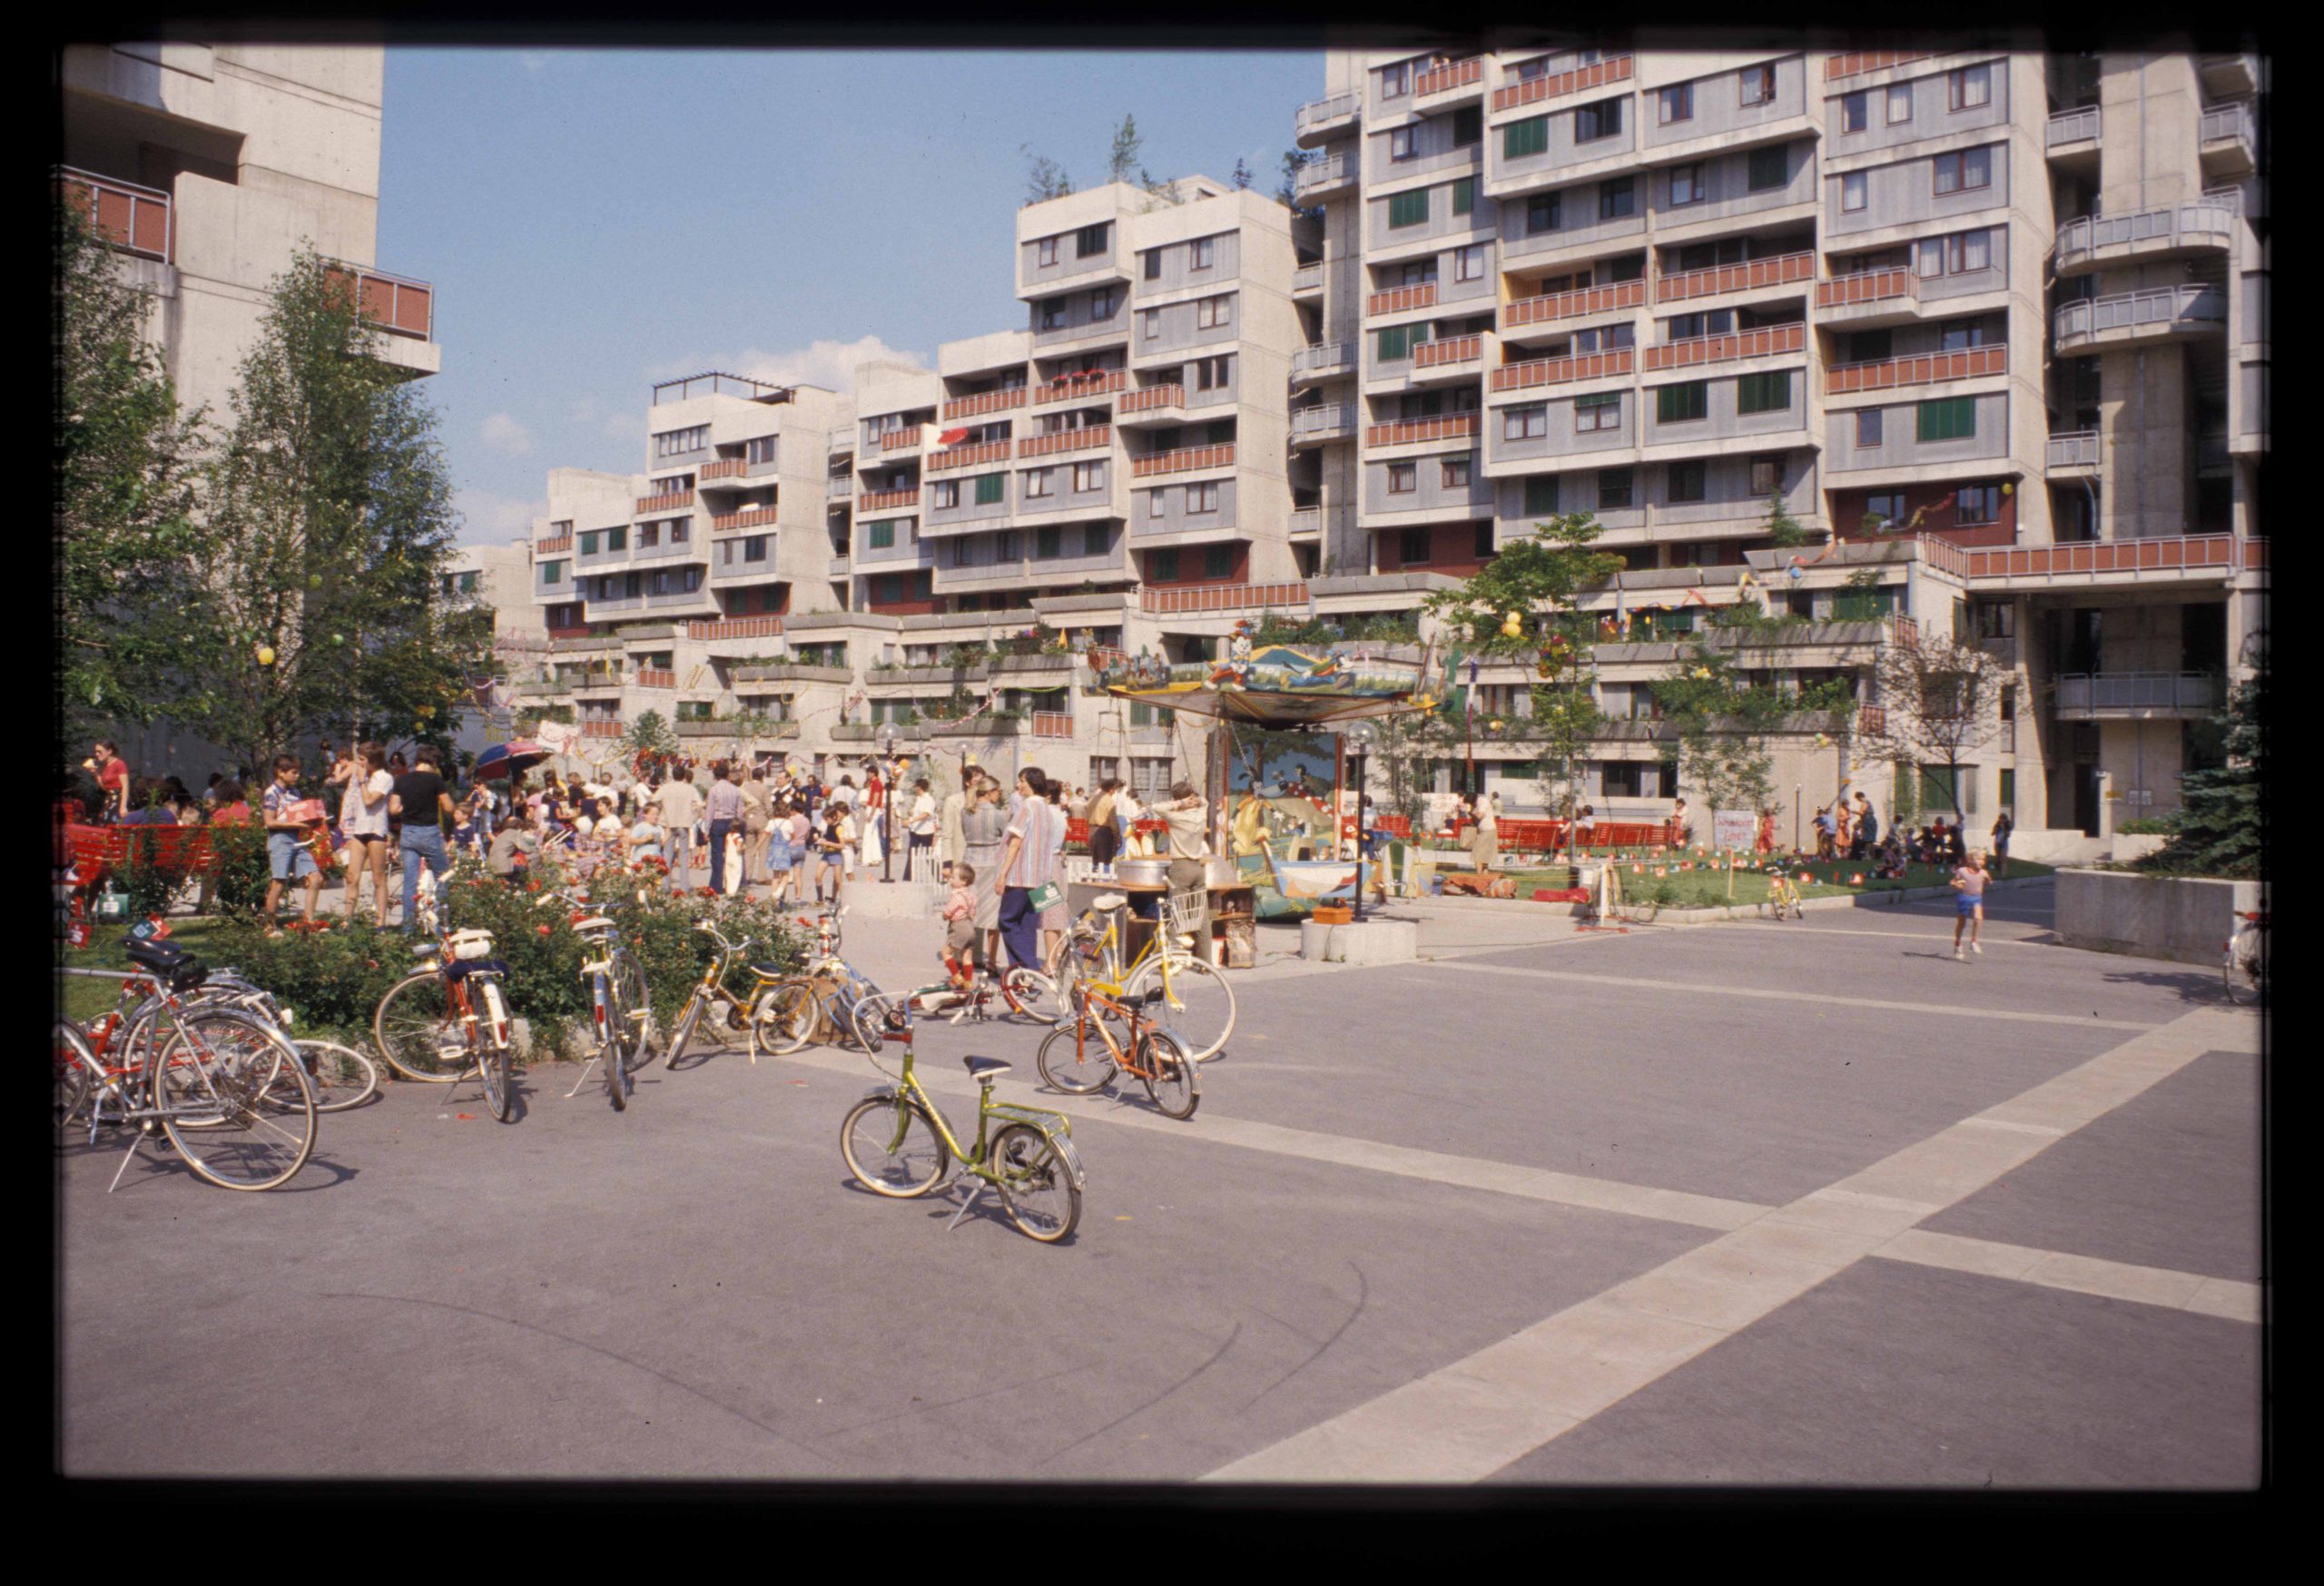 Exterior view, terraced housing estate with bicycles in the foreground and people on a public square